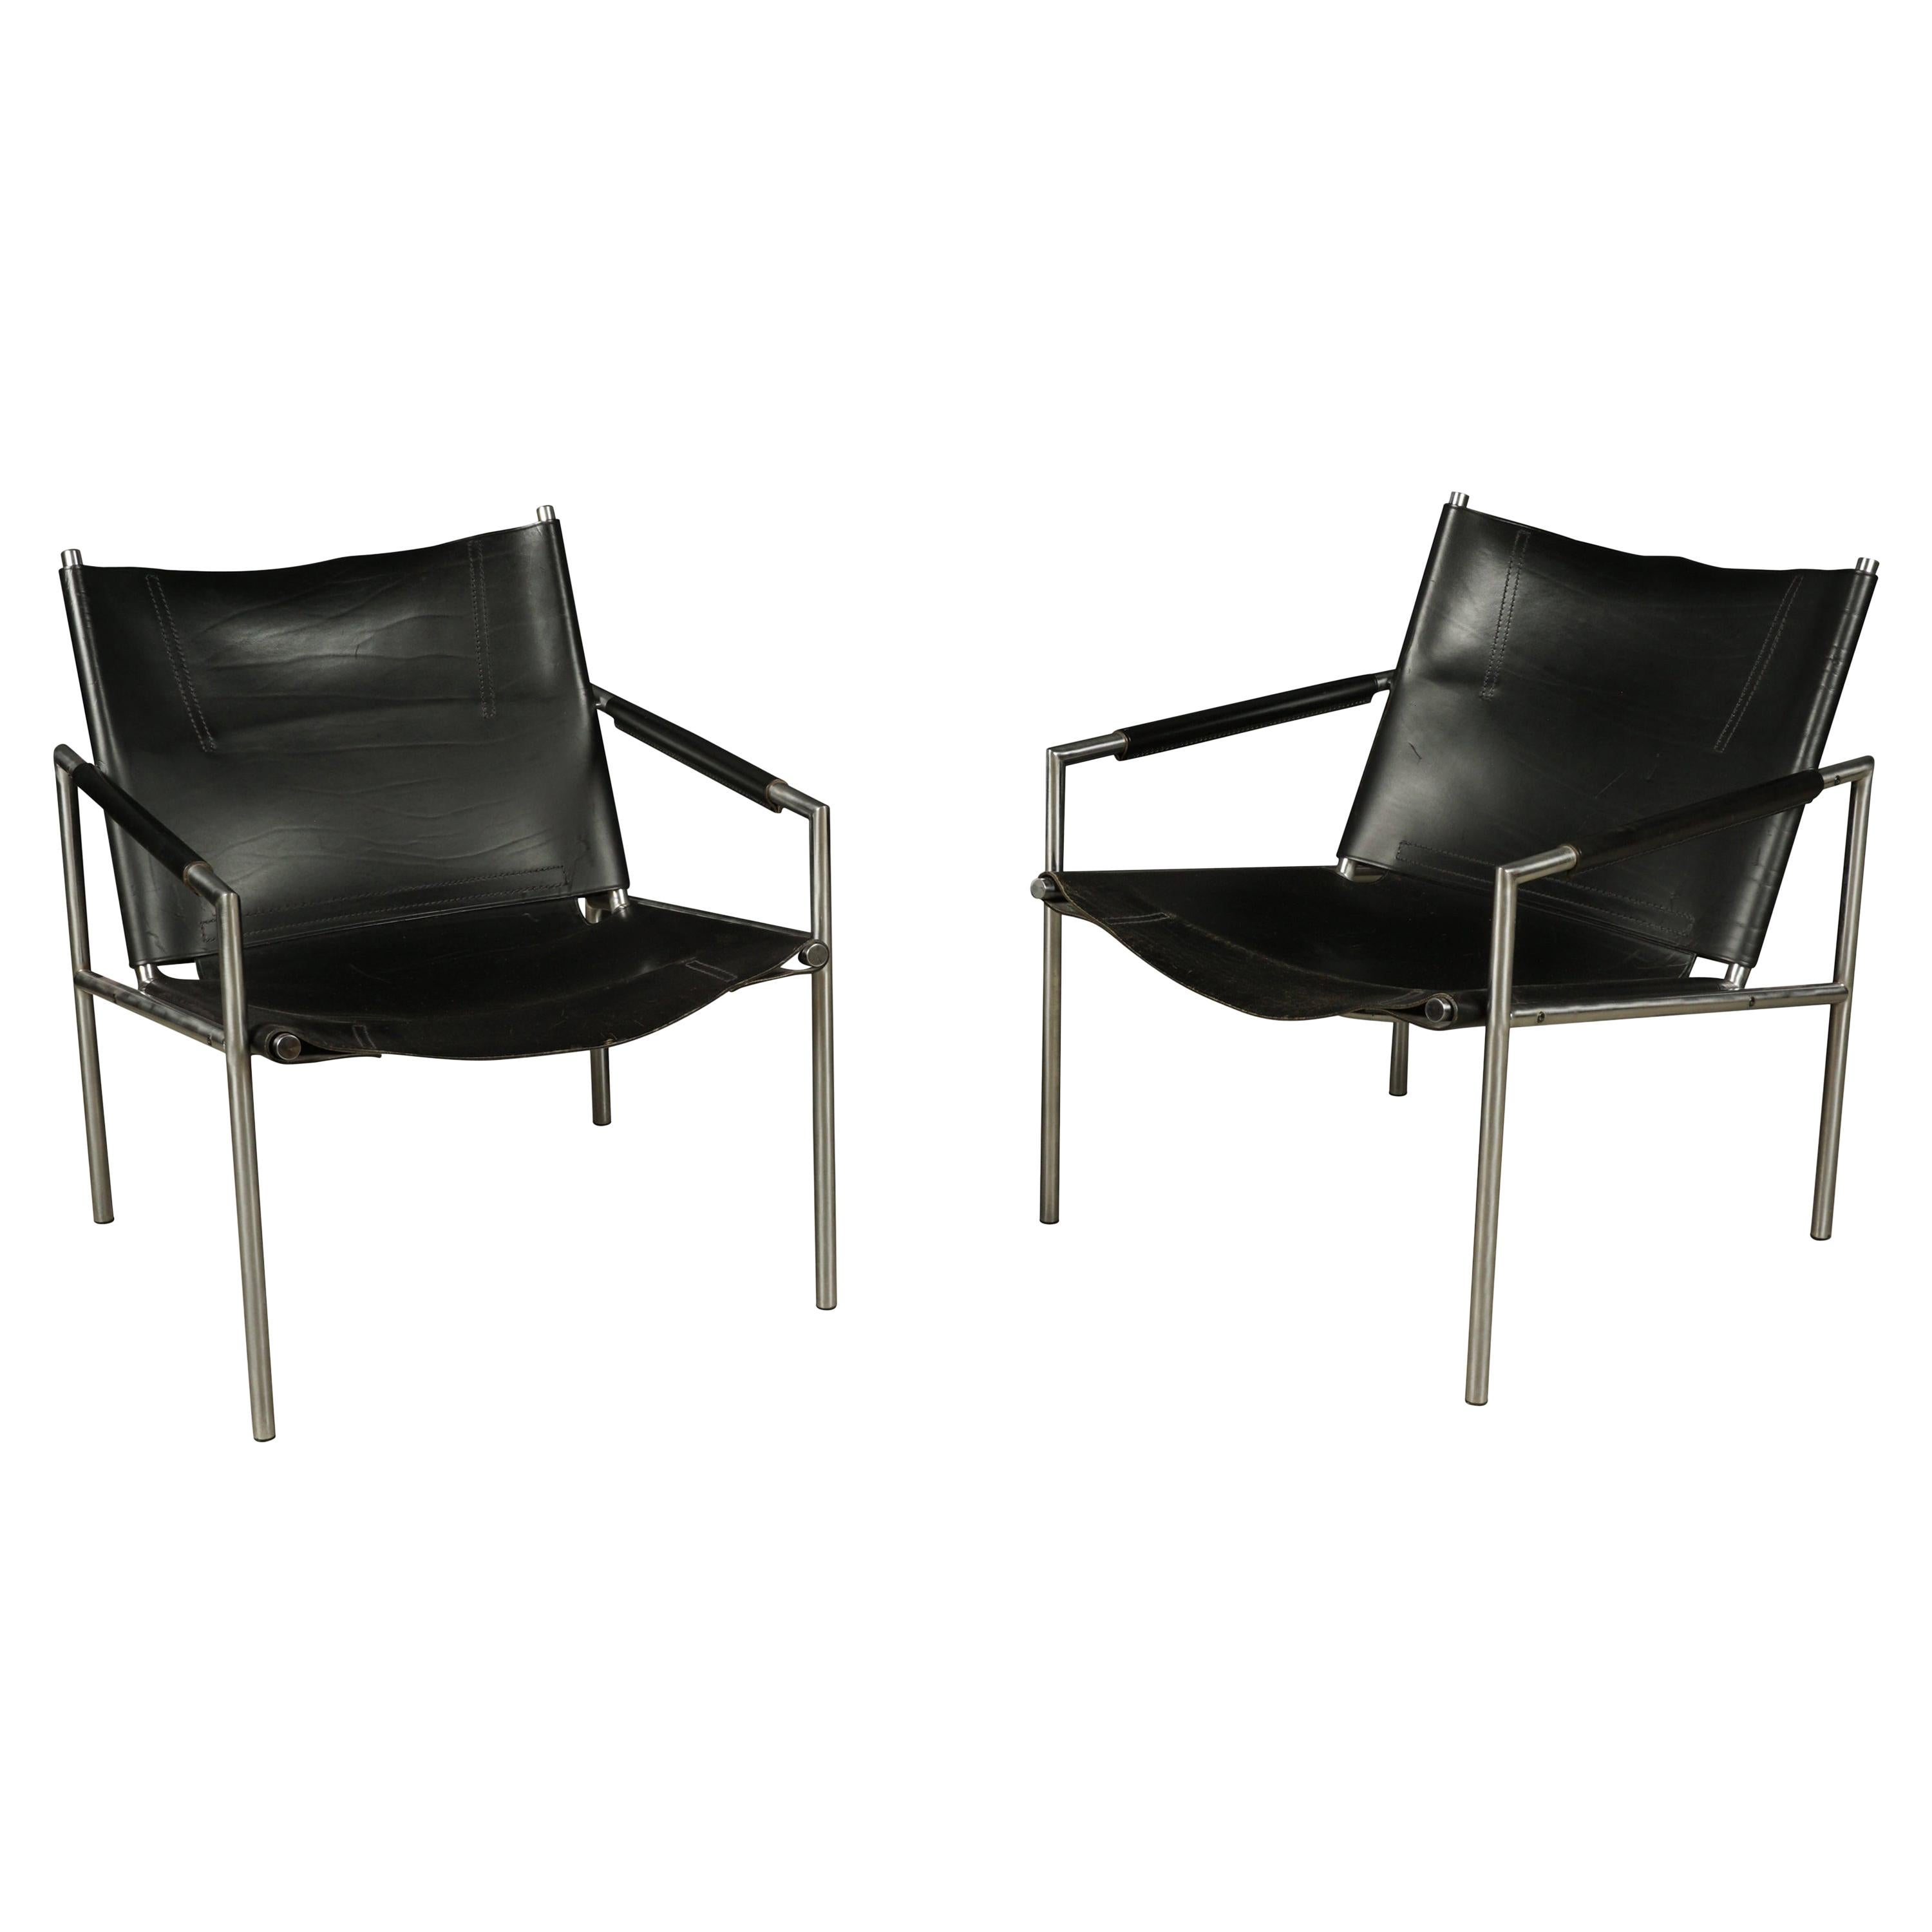 Leather Lounge Chairs by Martin Visser, Model 'SZ02' for 't Spectrum Bergeijk